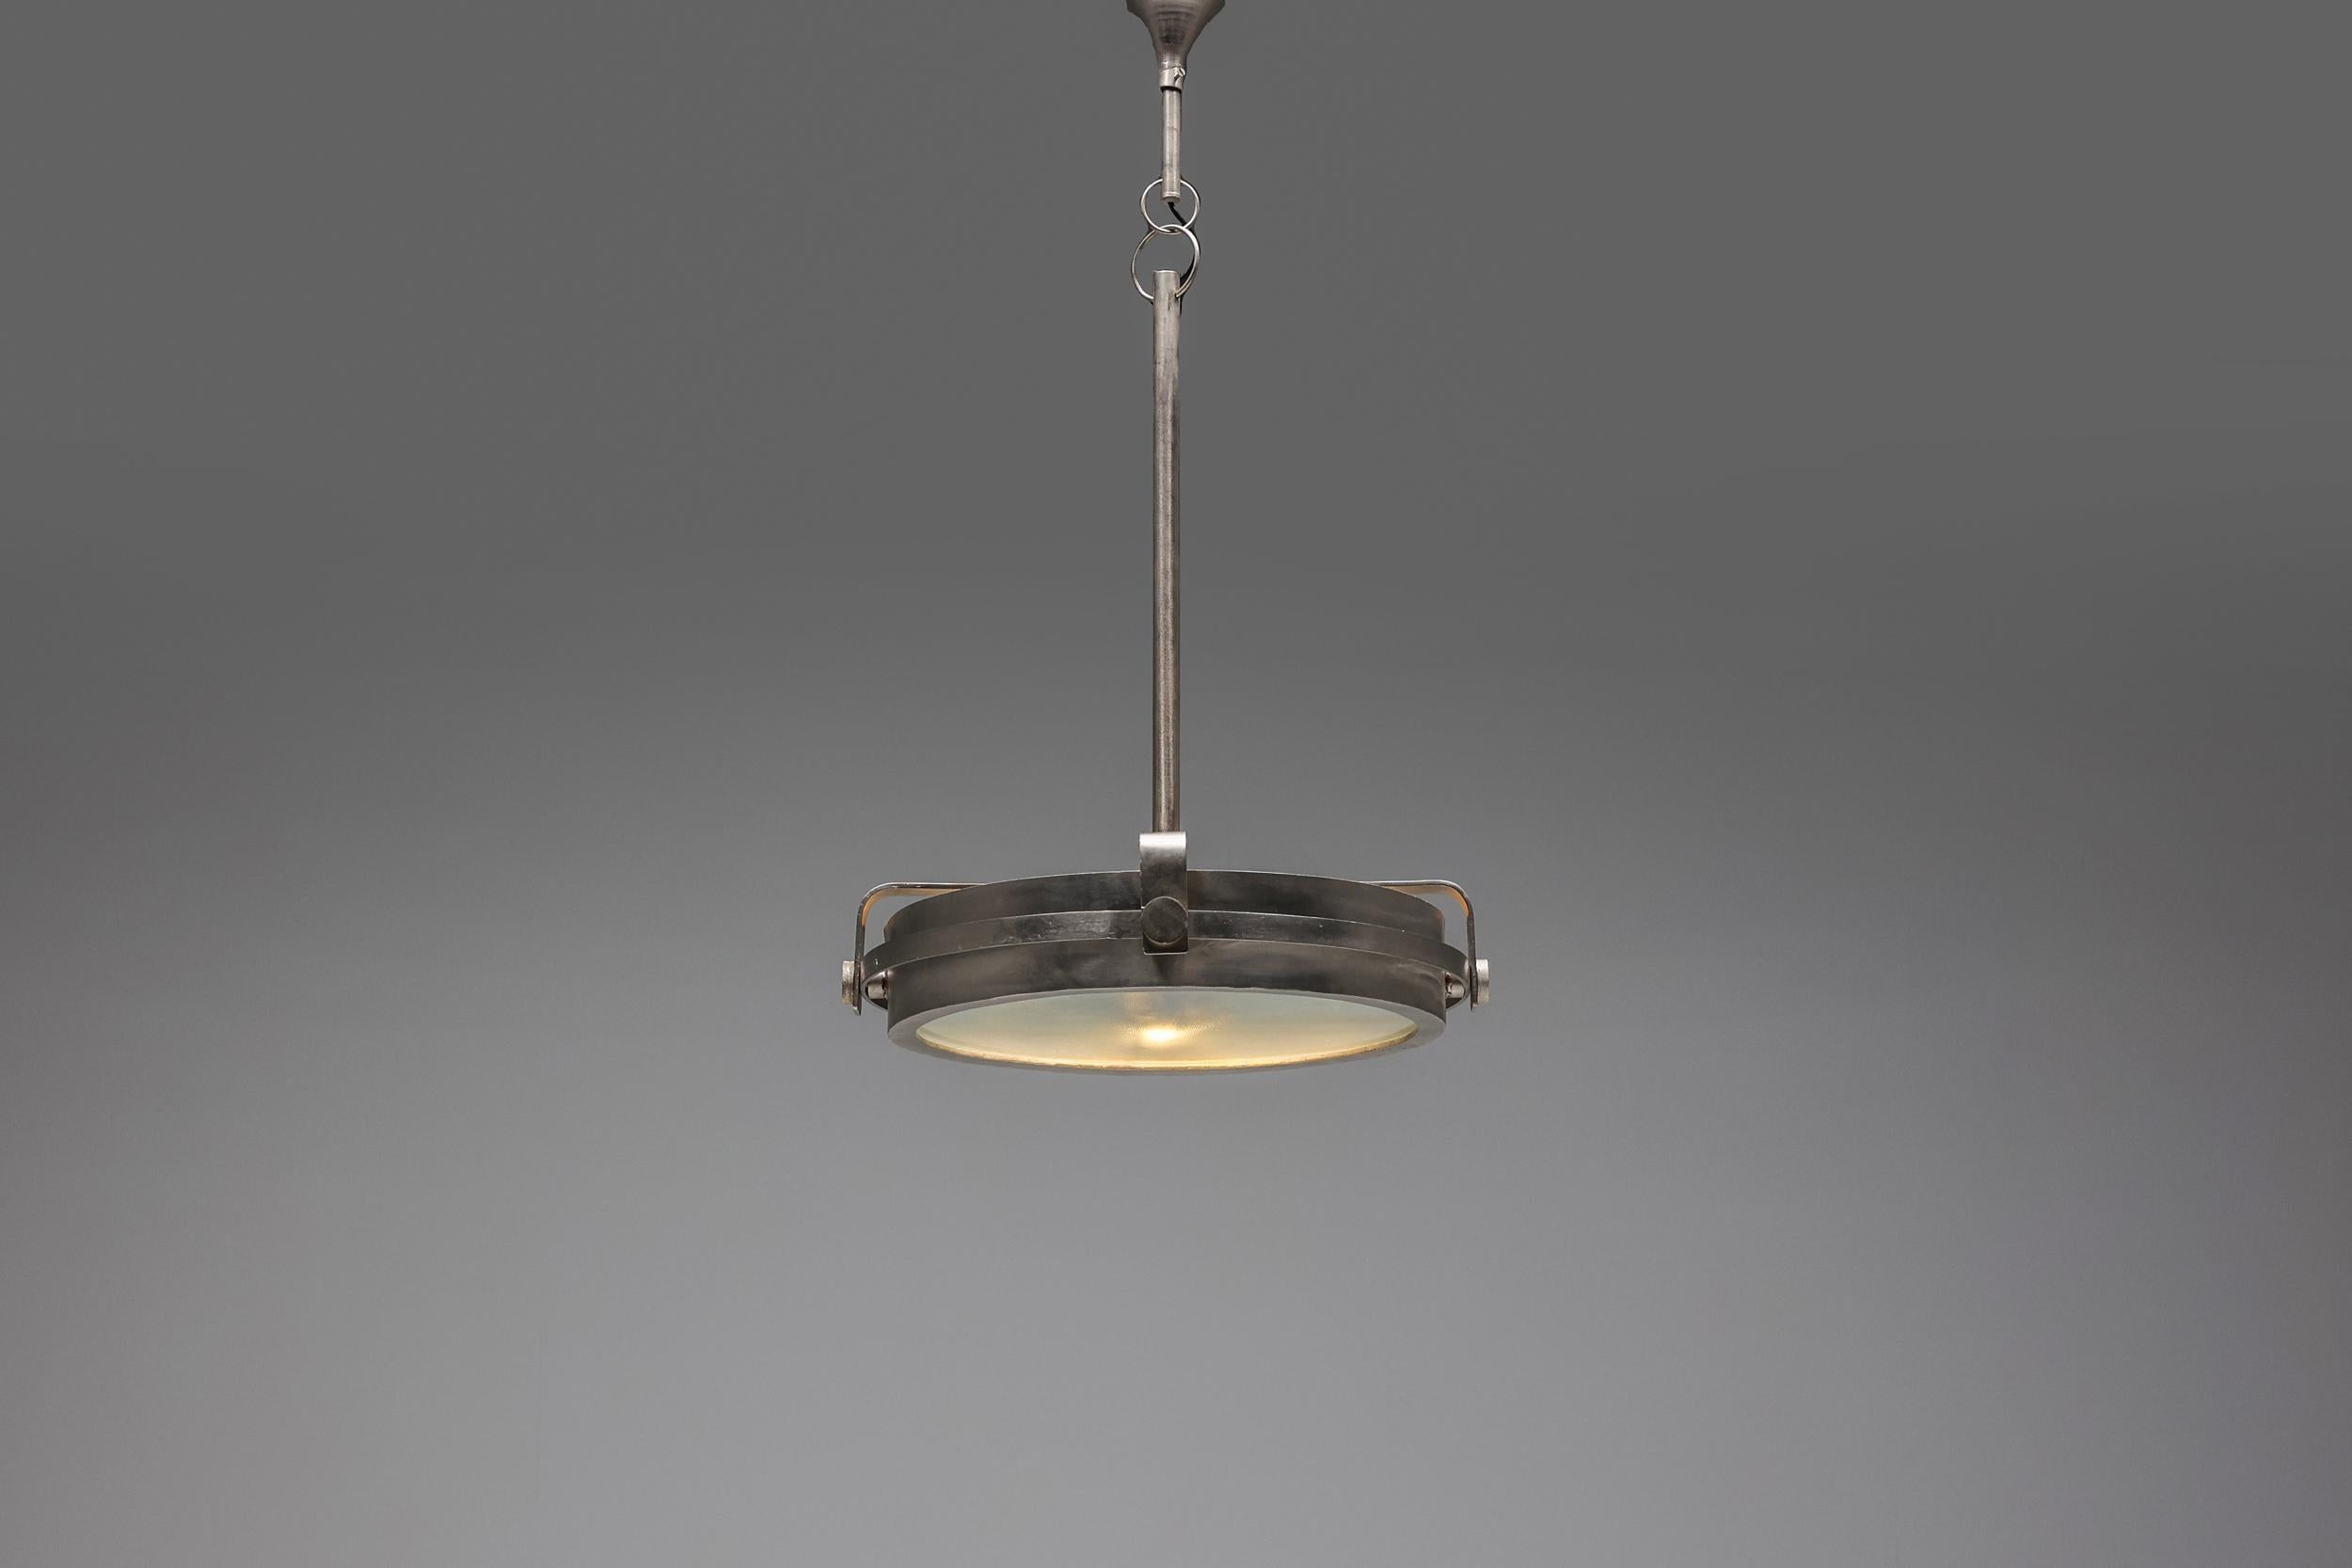 French Industrial Steel Ceiling Lamp, Post-Modern, Chandelier, Pendant, 1990's For Sale